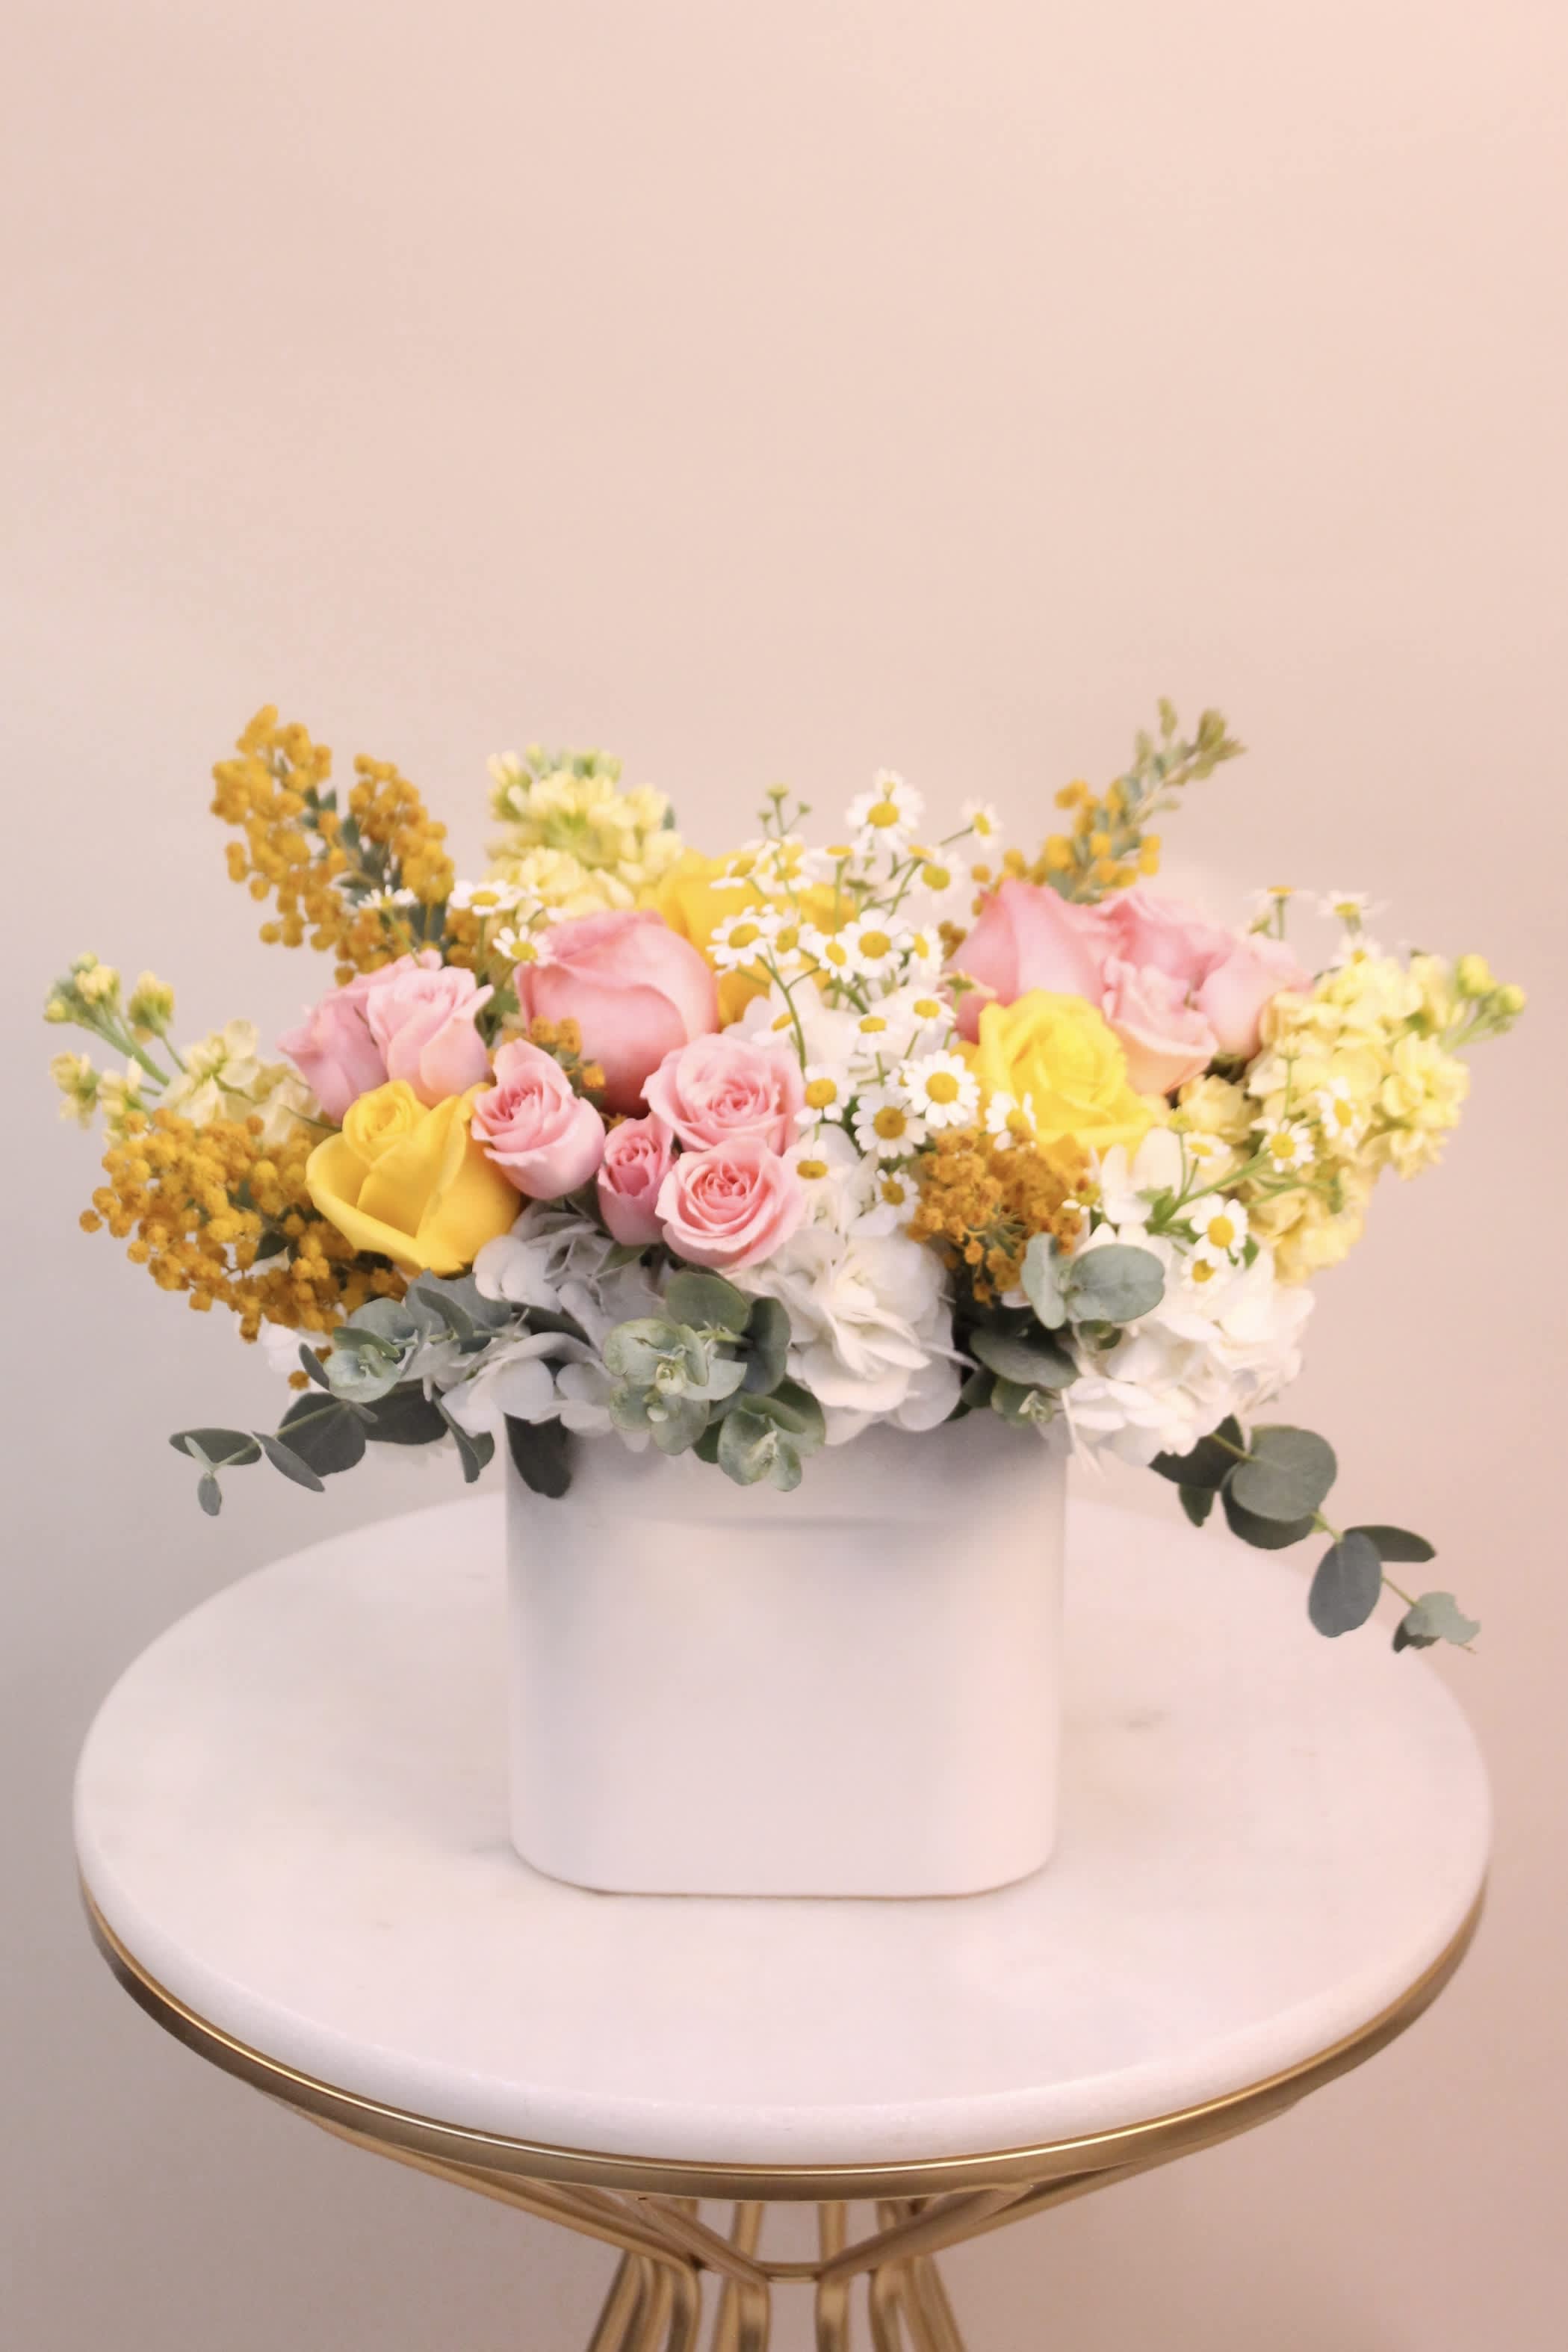 Citrus Blossom - A fresh mix of flowers in an oval ceramic vase. Flowers may include garden roses, hydrangeas, majolica spray roses, chamomile, stock, mimosa and eucalyptus.  Vase dimension: 6&quot; W x 2.6&quot; L x 5.9&quot; H 